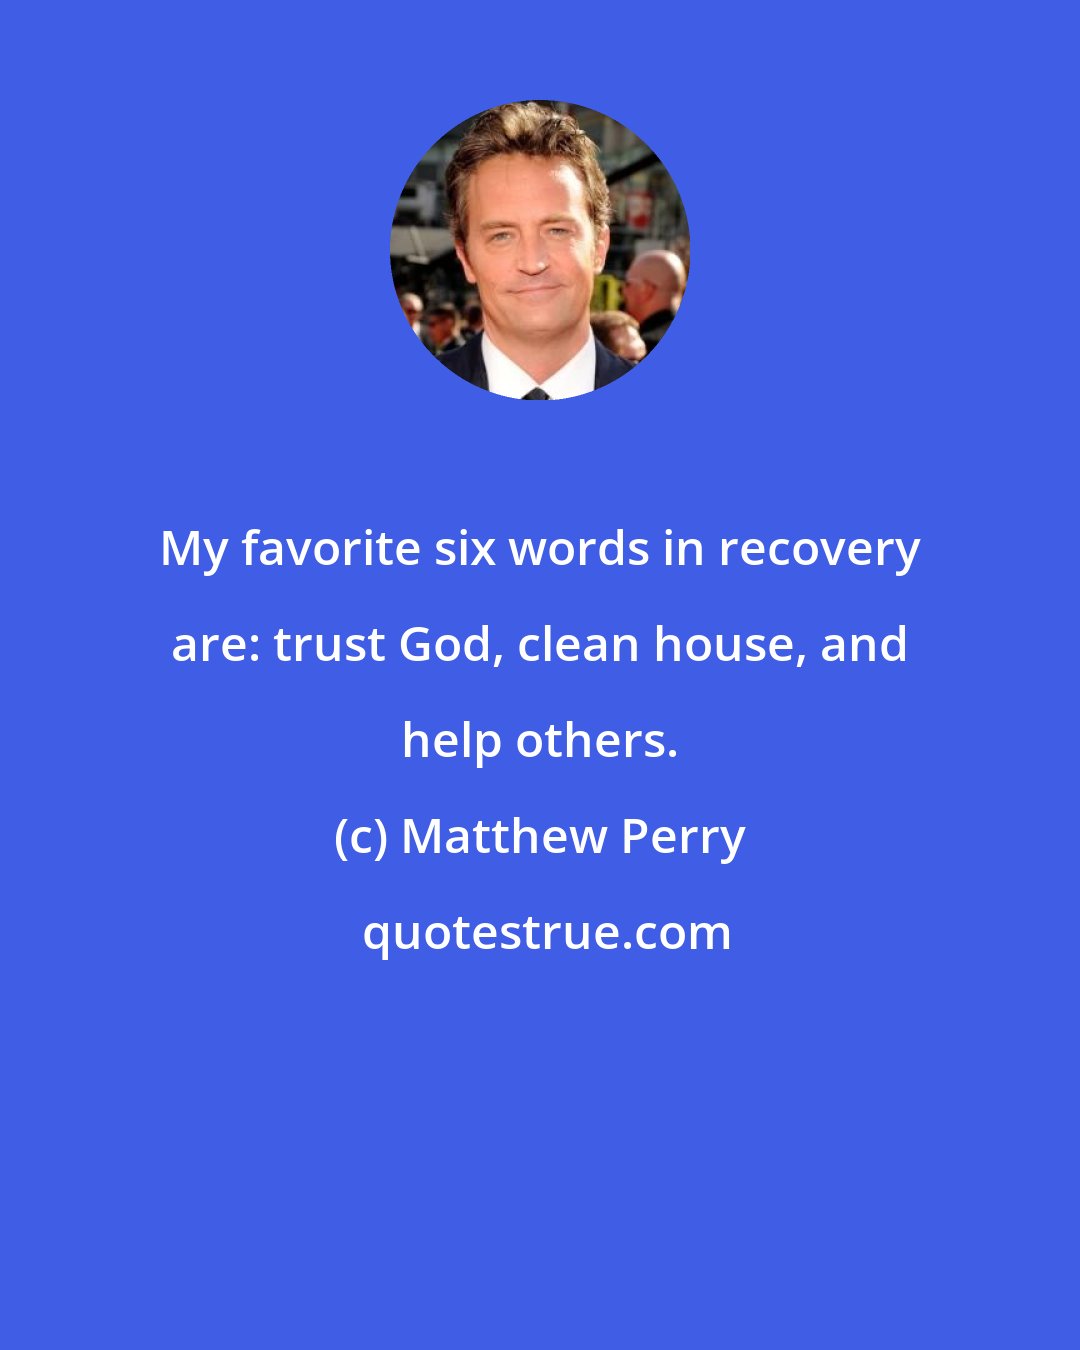 Matthew Perry: My favorite six words in recovery are: trust God, clean house, and help others.